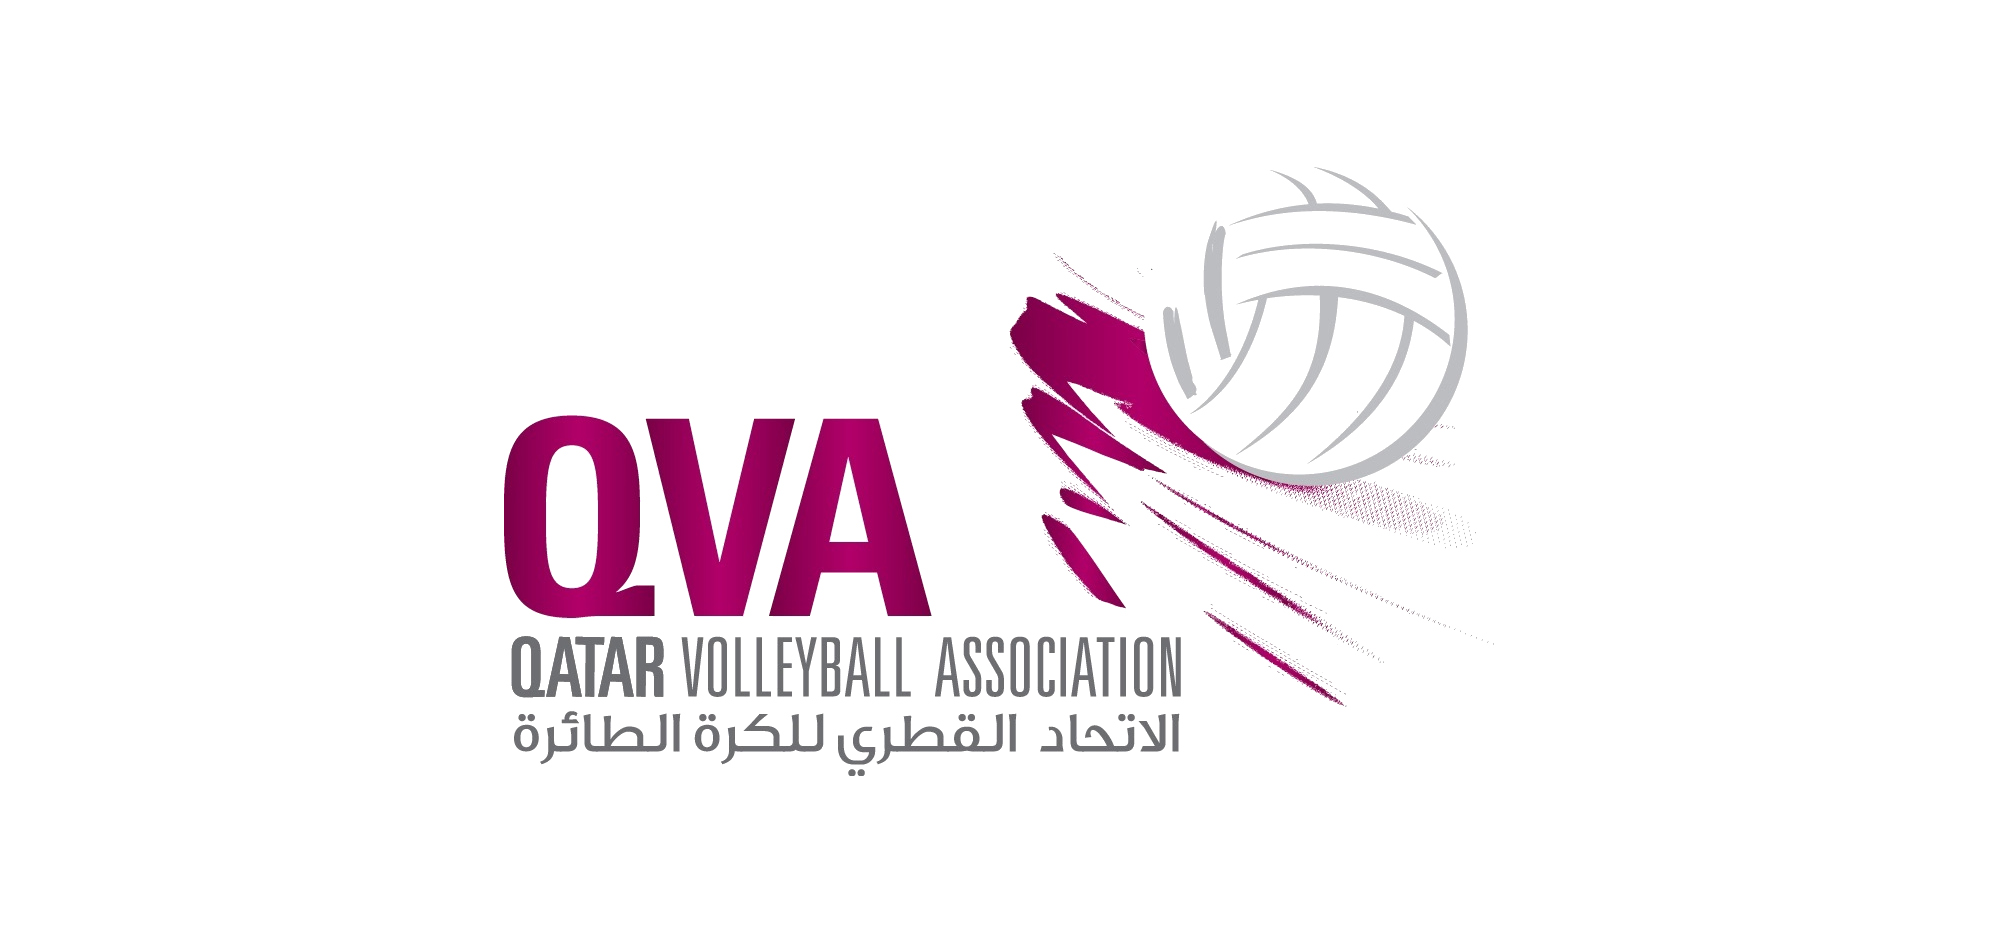 Qatar Volleyball Association Releases Schedule to Complete 2019-20 Season